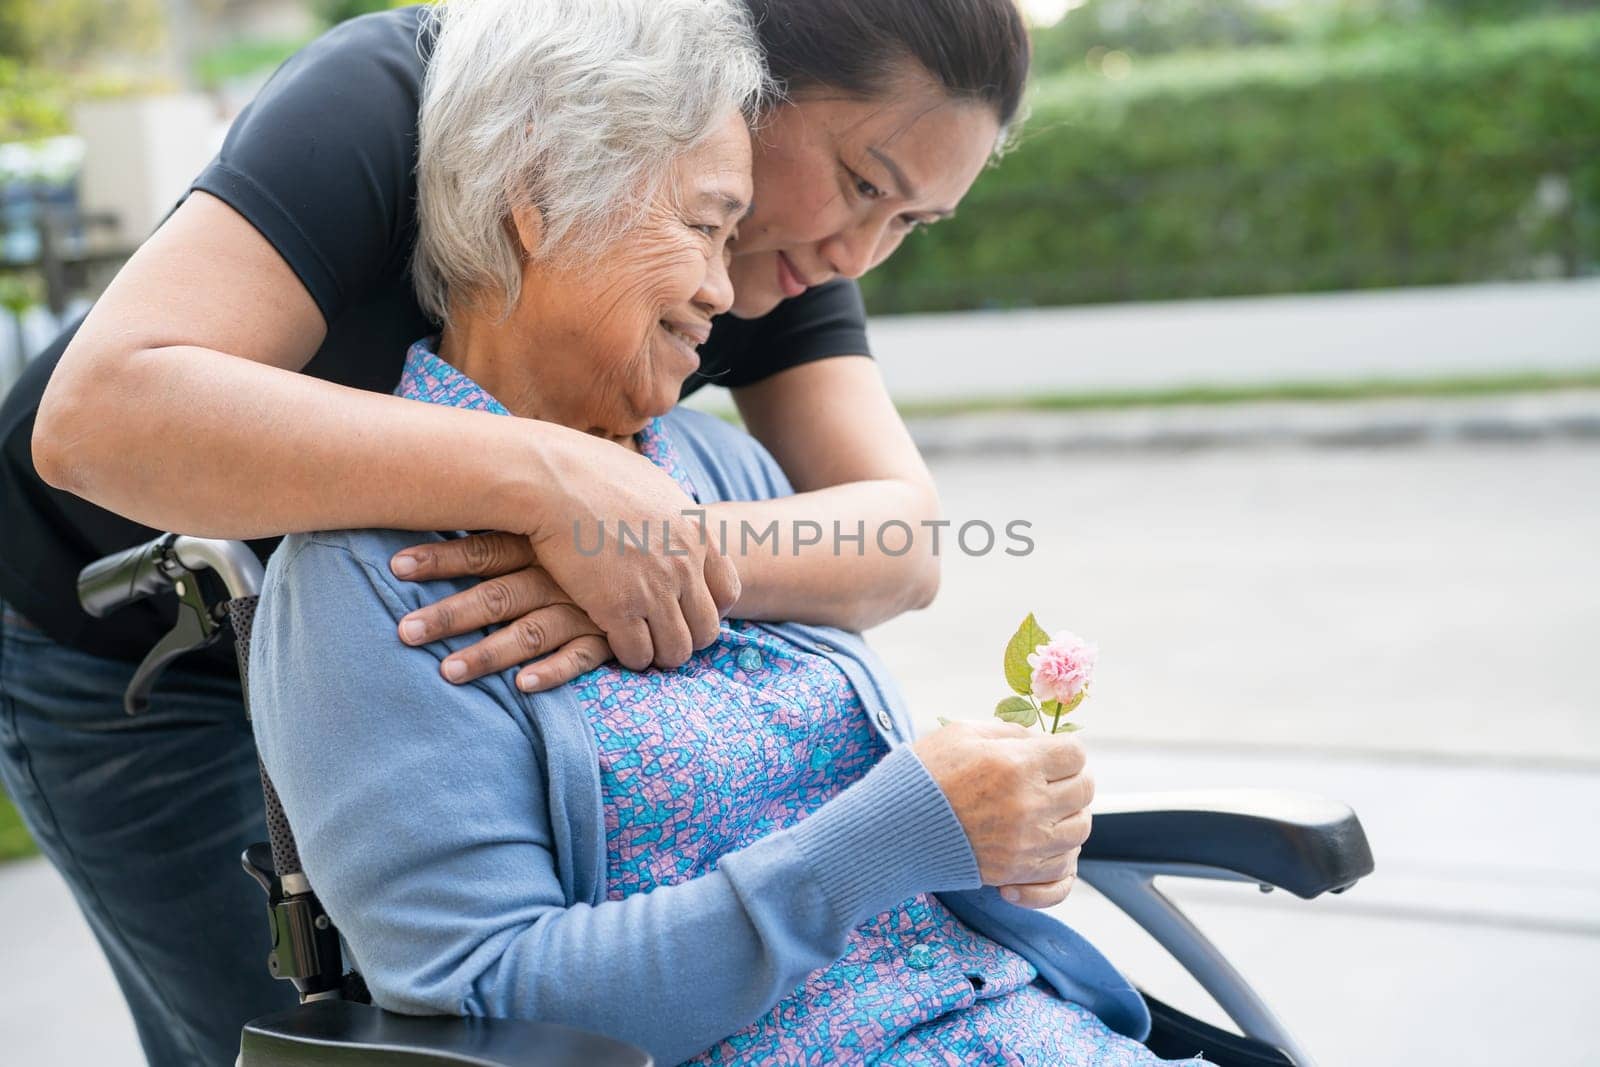 Caregiver help and care Asian senior woman patient sitting on wheelchair, healthy strong medical concept.